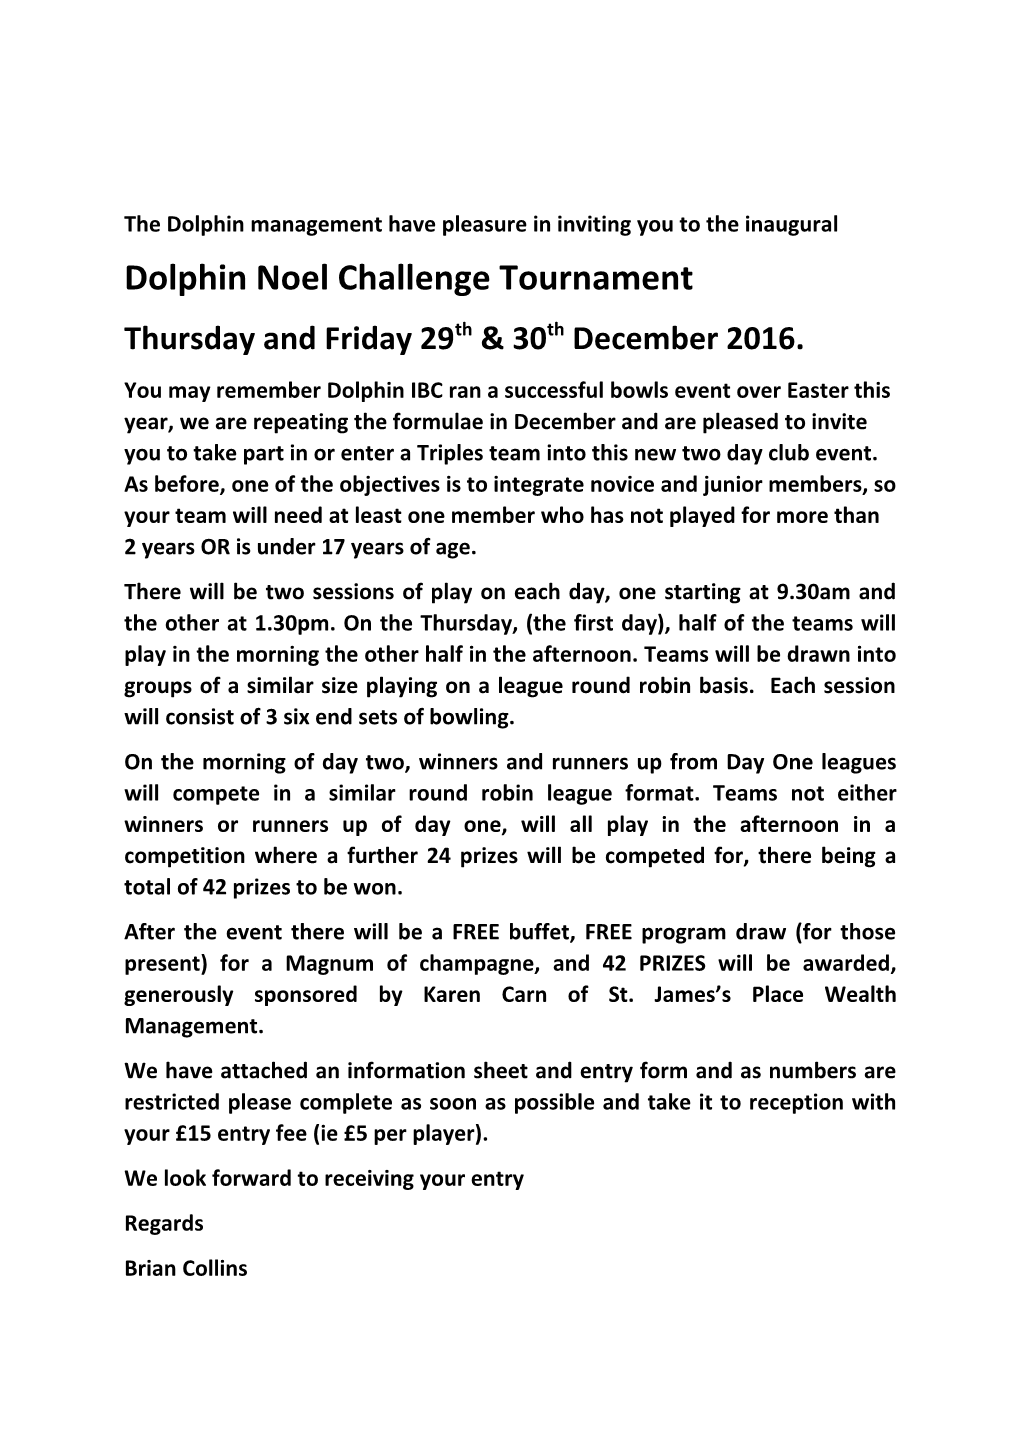 The Dolphin Management Have Pleasure in Inviting You to the Inaugural